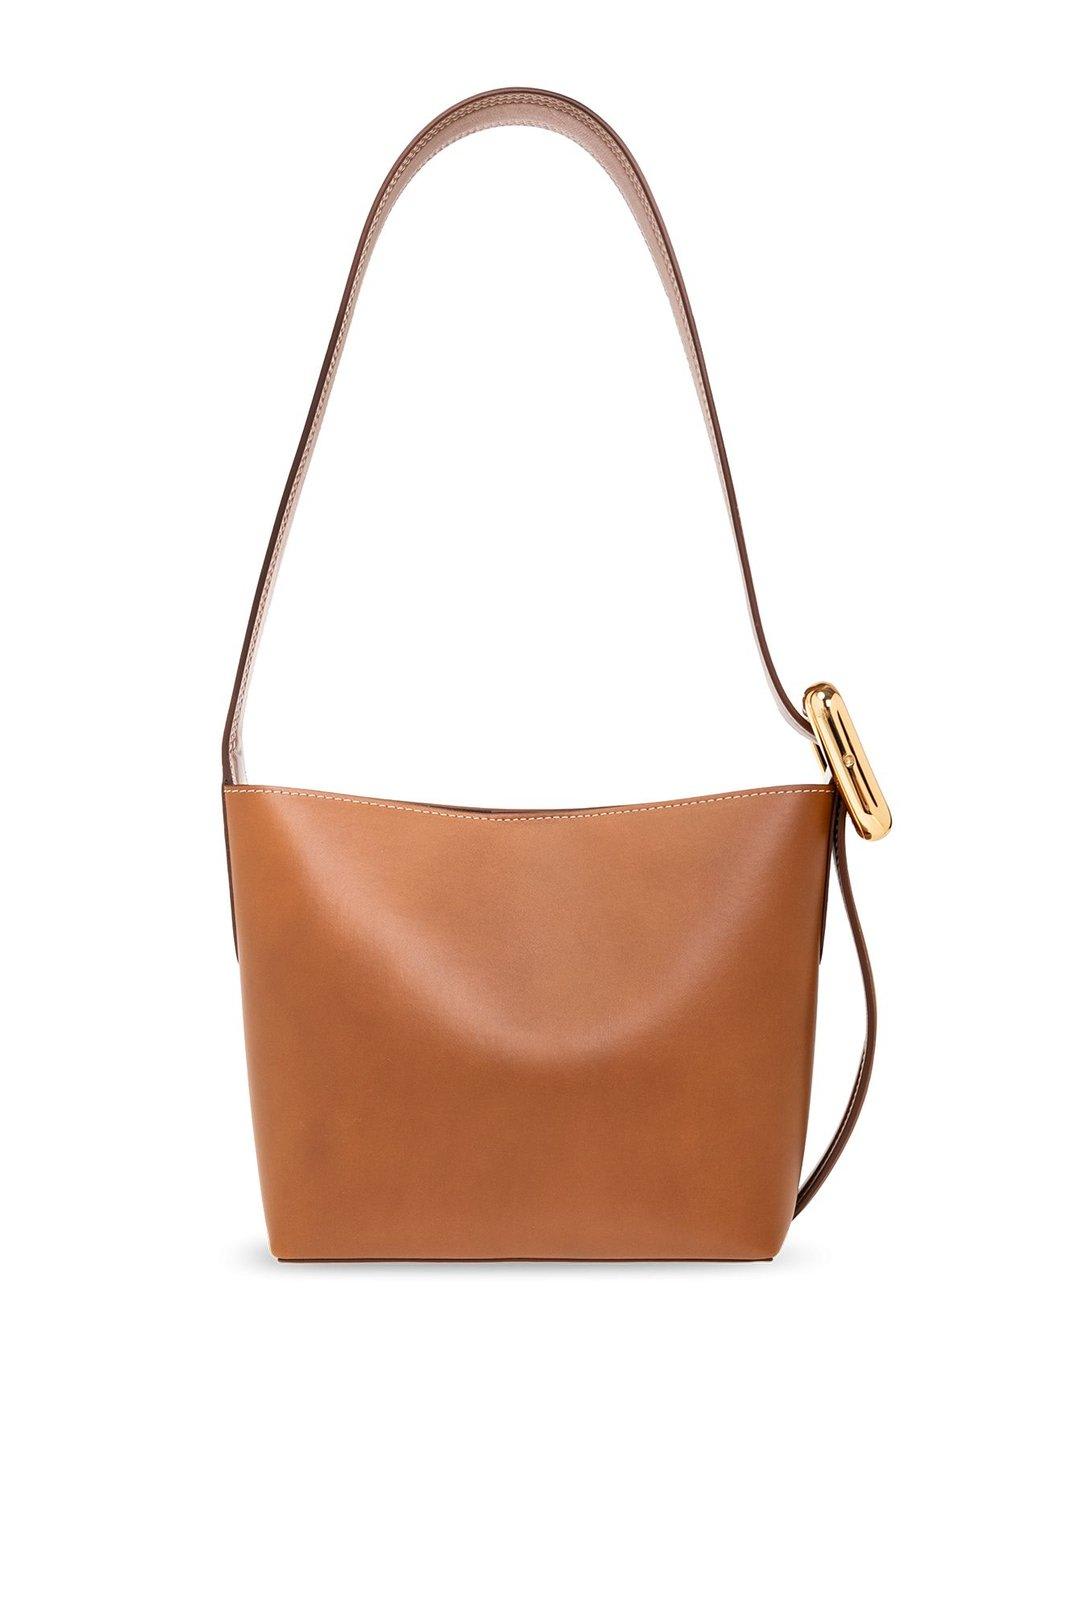 Shop Jacquemus Buckled Small Bucket Bag In Leather Brown